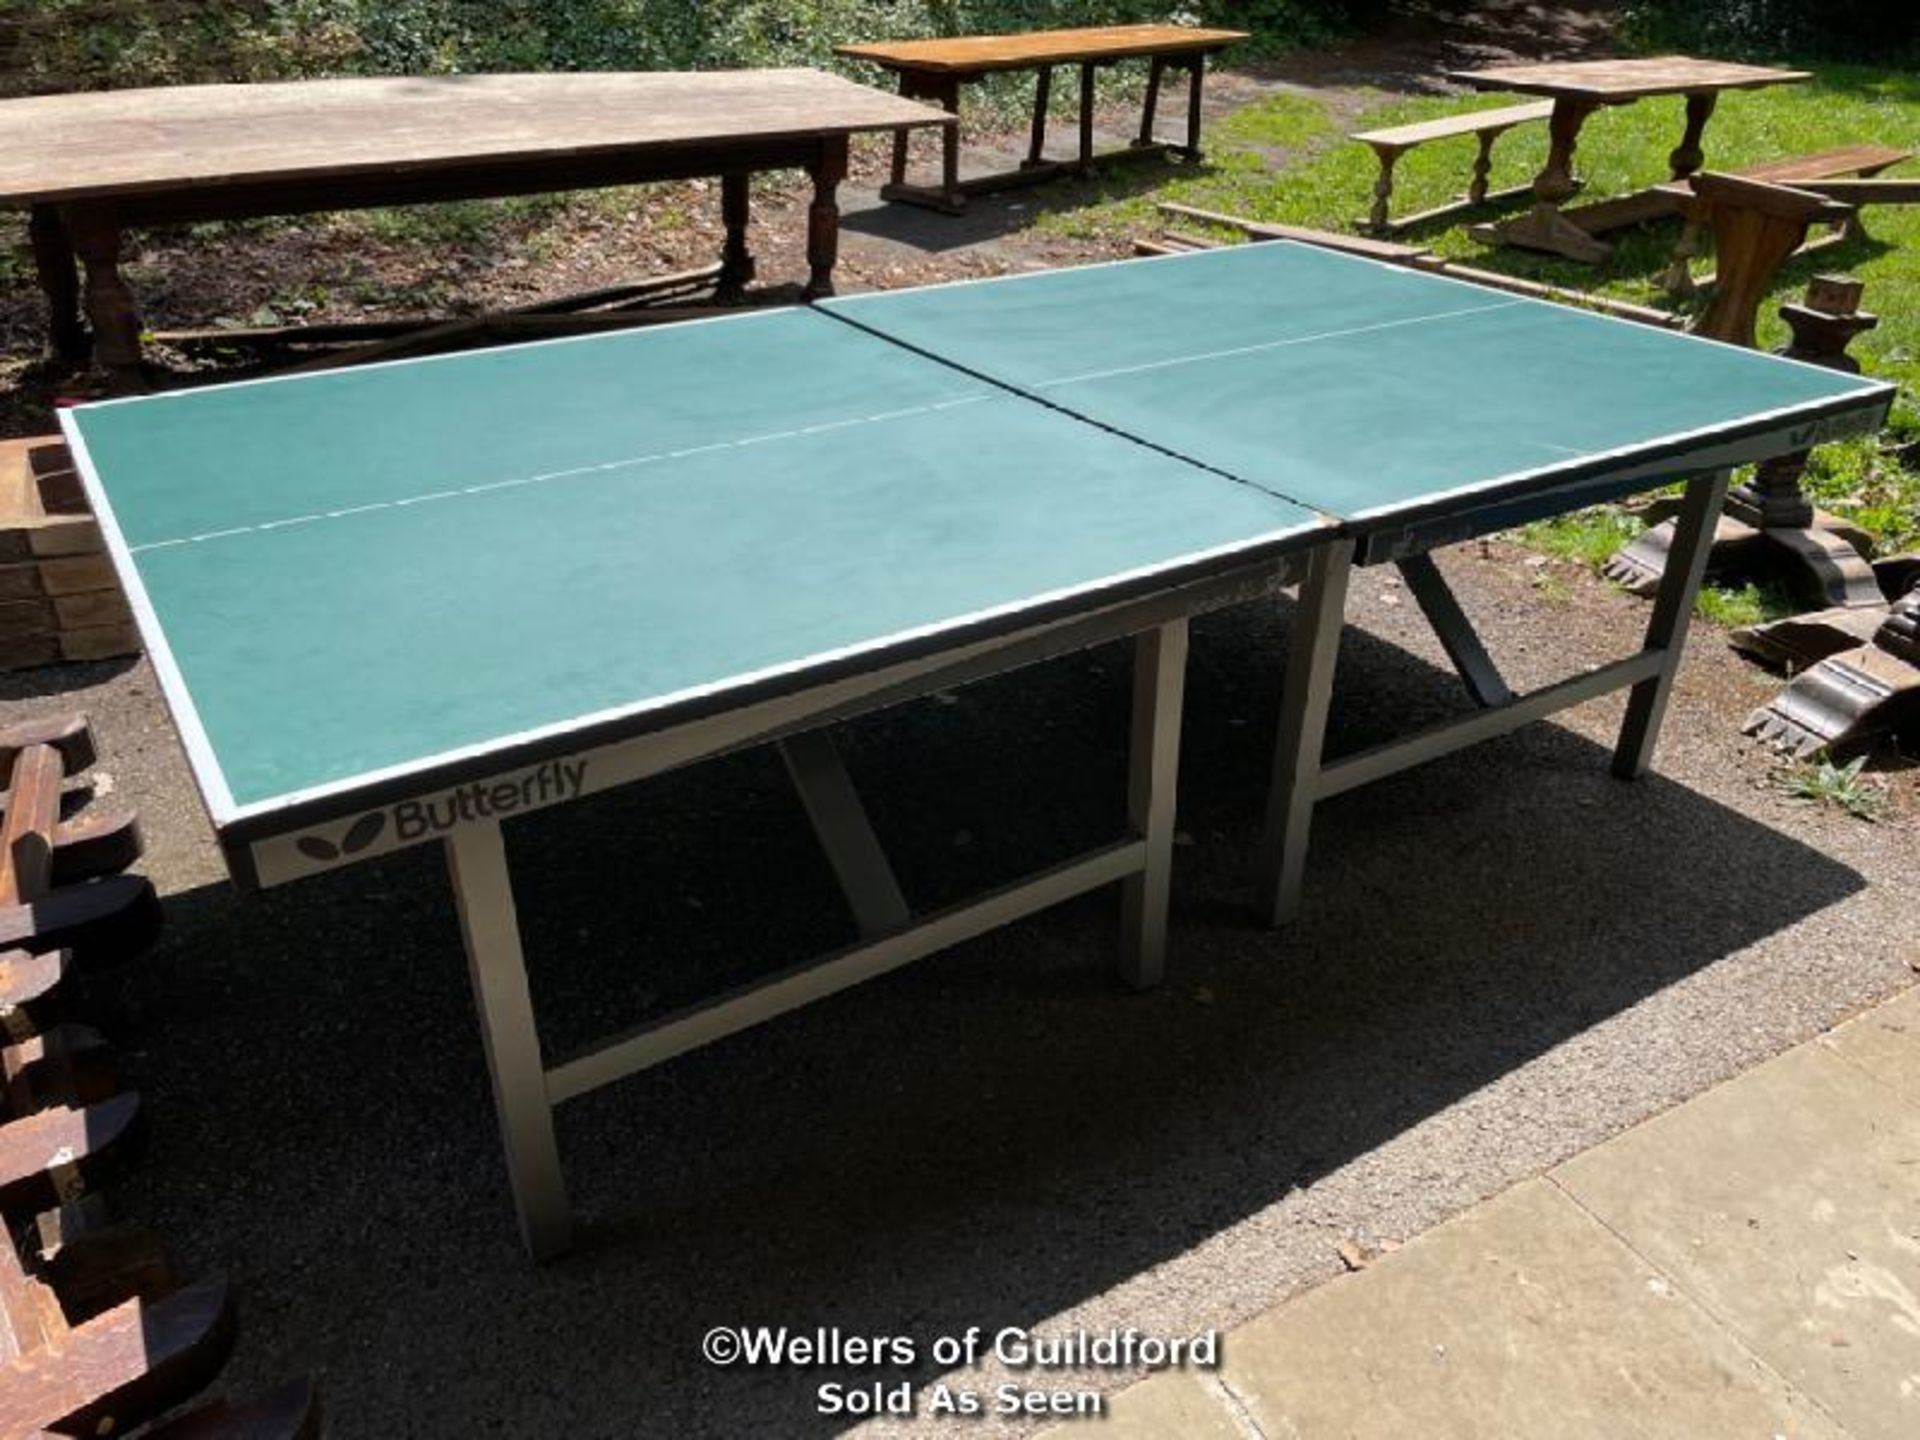 *BUTTERFLY EUROPA 25 FOLD OUT 2 PIECE TABLE TENNIS TABLE ON WHEELS - TOTAL SIZE 274CM L X 153CM W